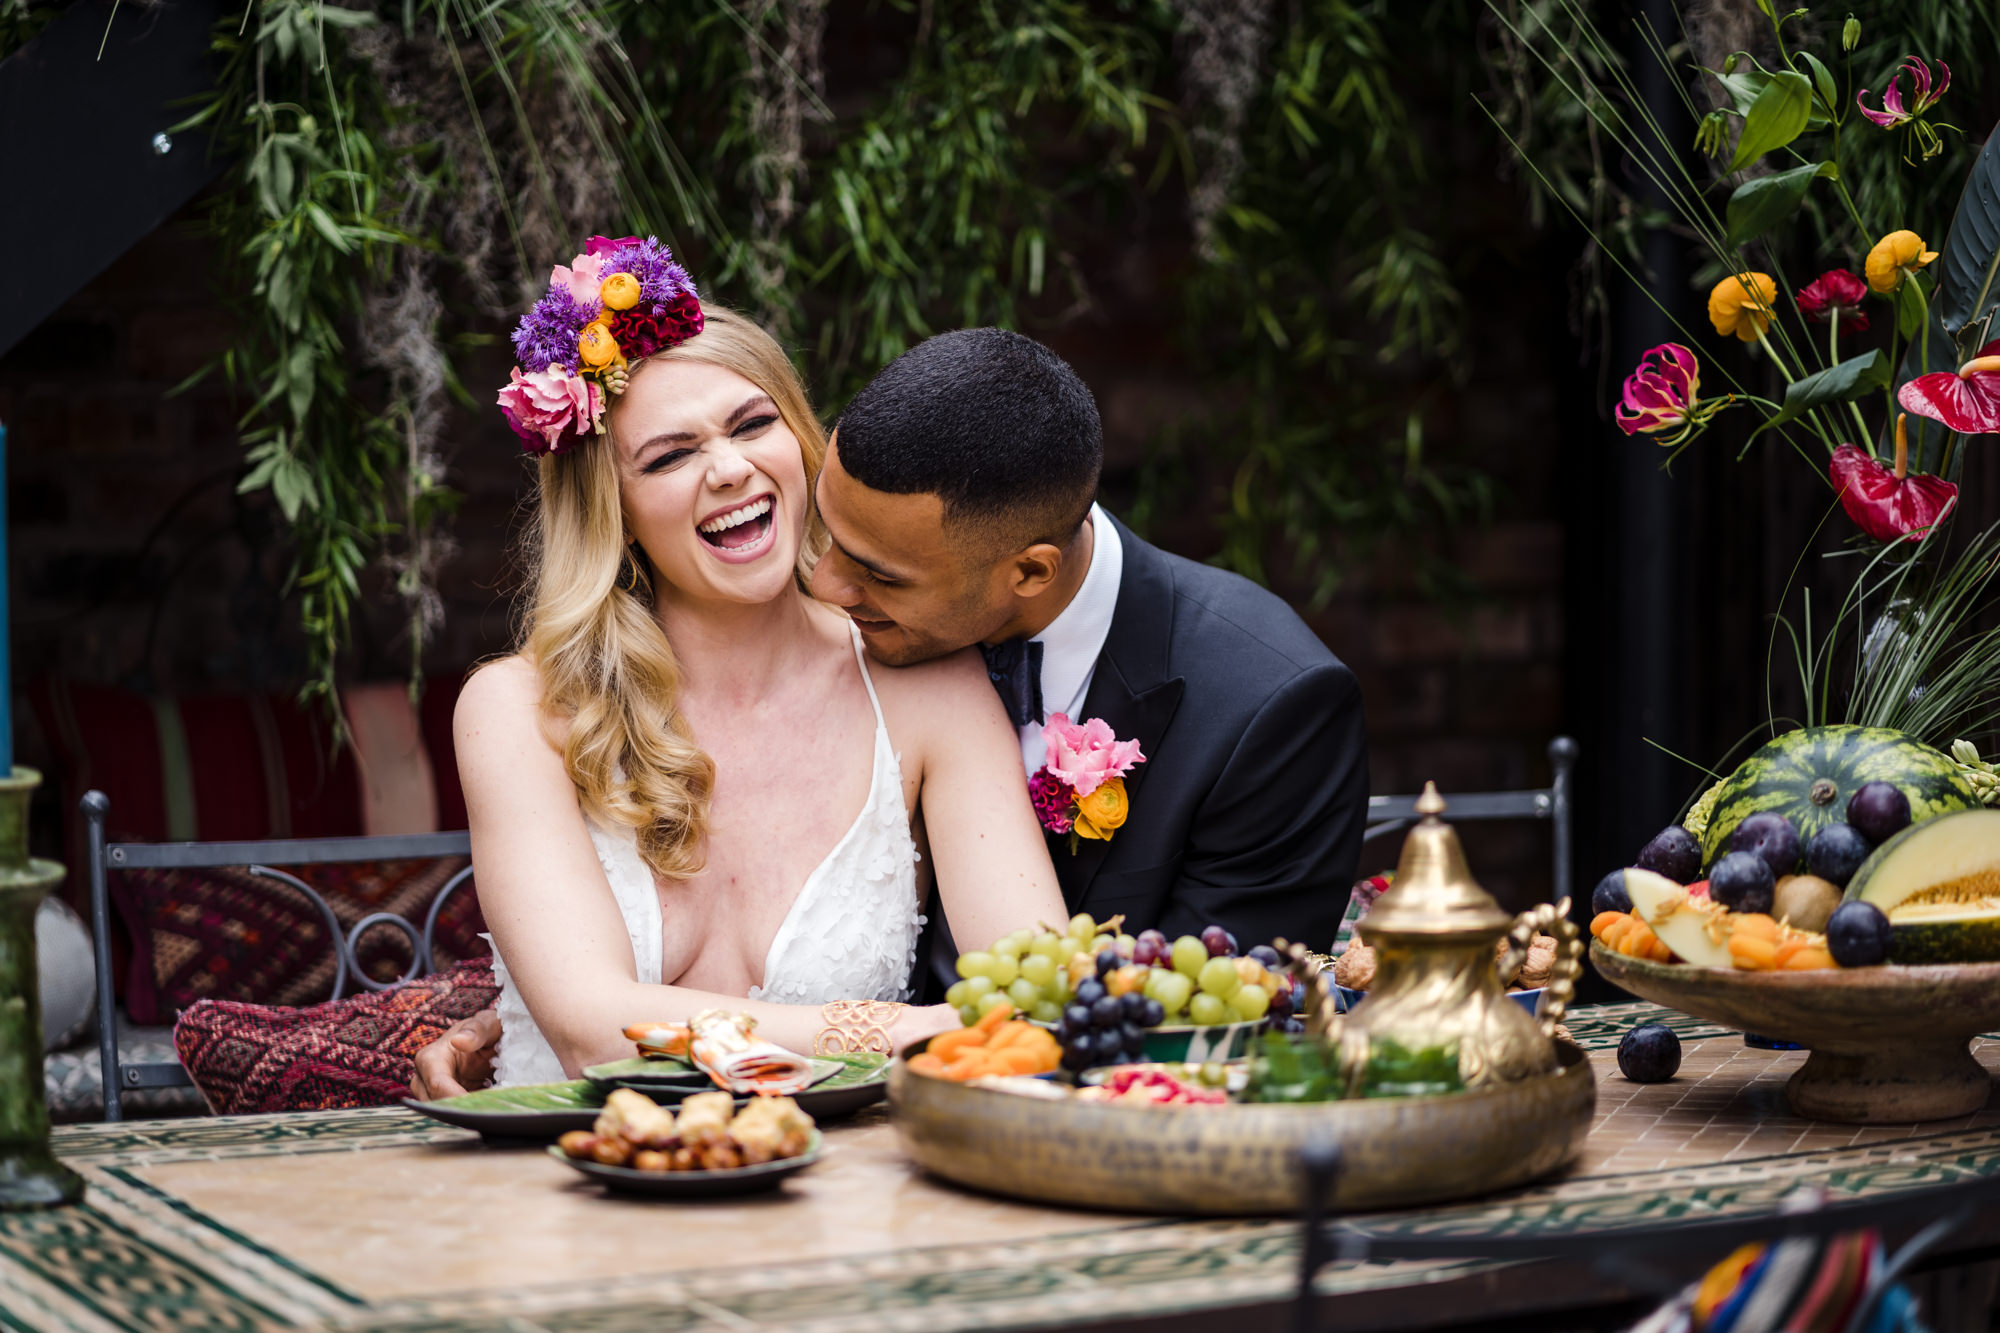 groom kisses bride on the shoulder making her laugh. bride wears a bold colourful statement flower crown